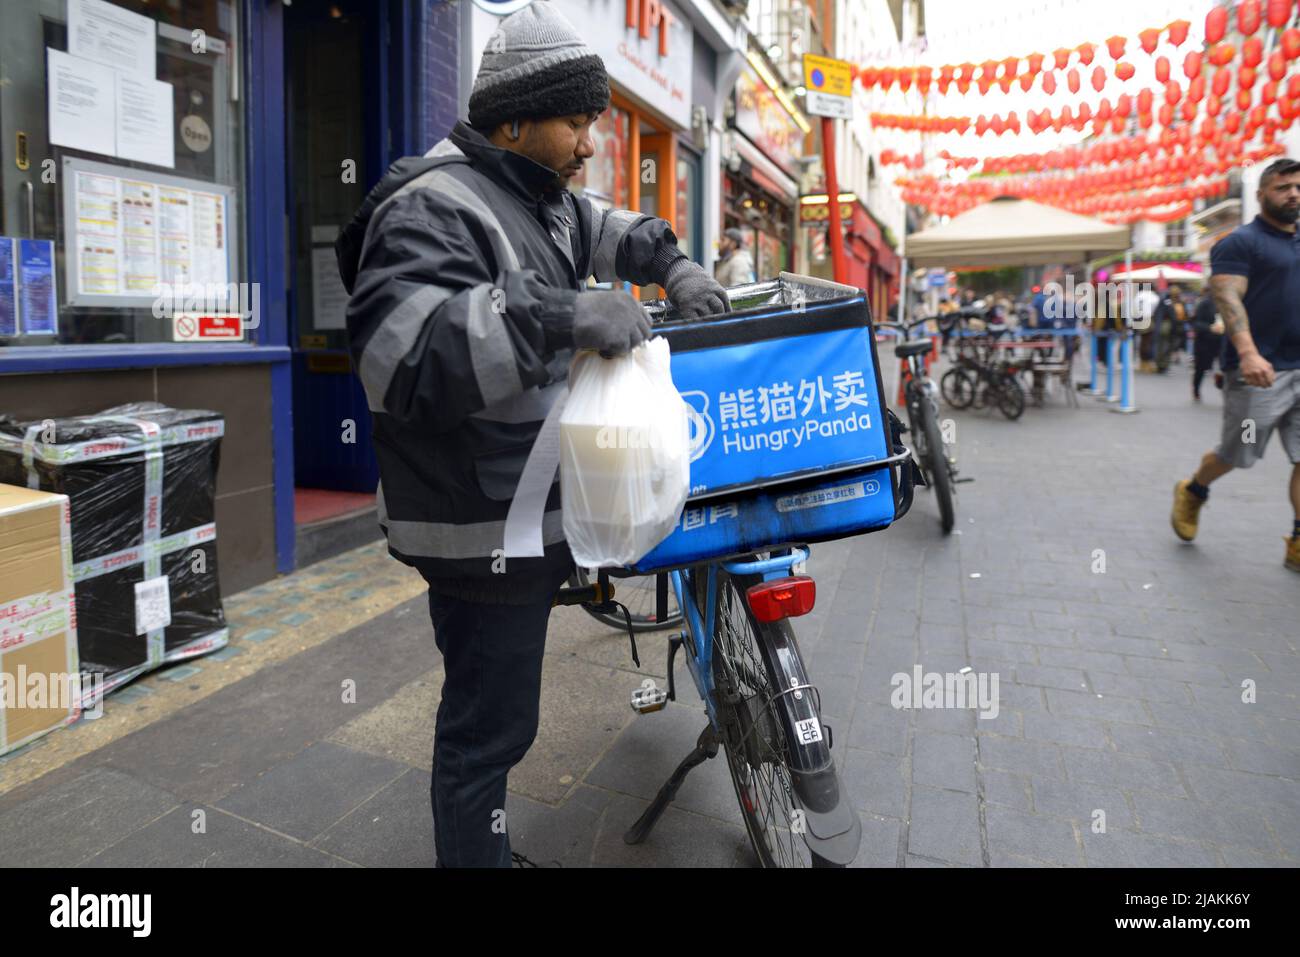 London, England, UK. Hungry Panda food delivery rider in Chinatown Stock Photo